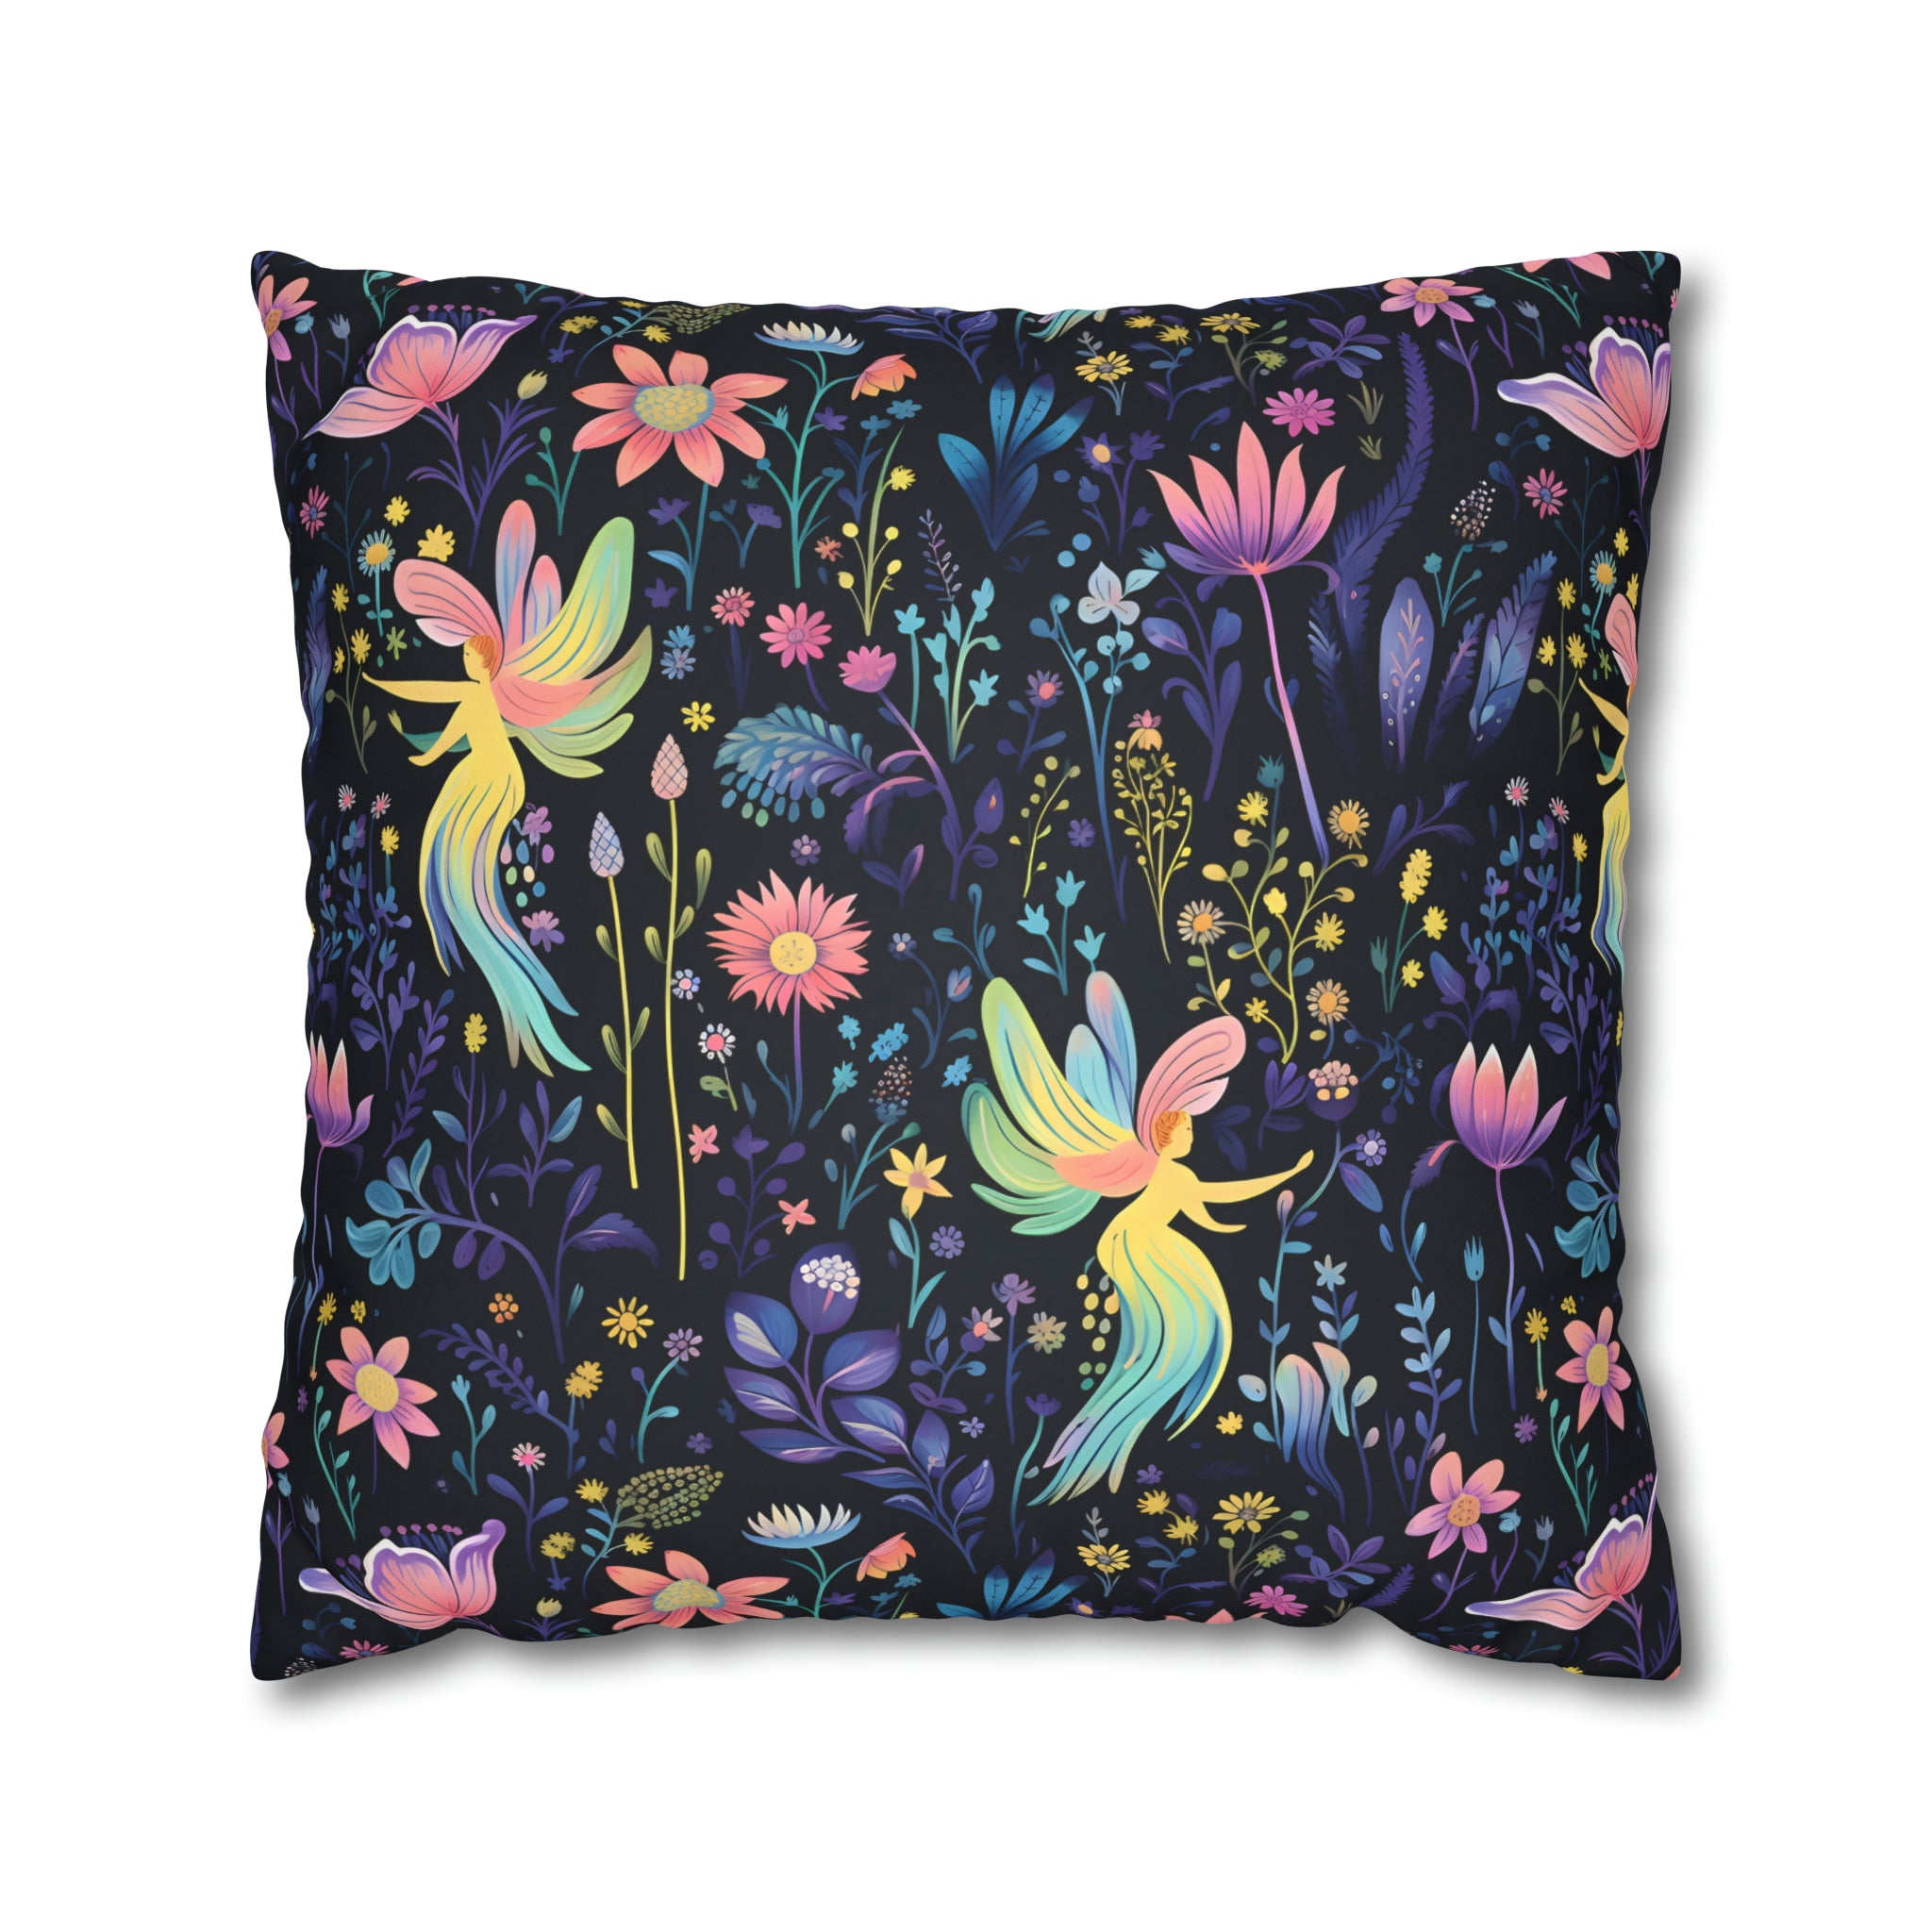 Glowing Garden Fairies Faux Suede Pillow Cover